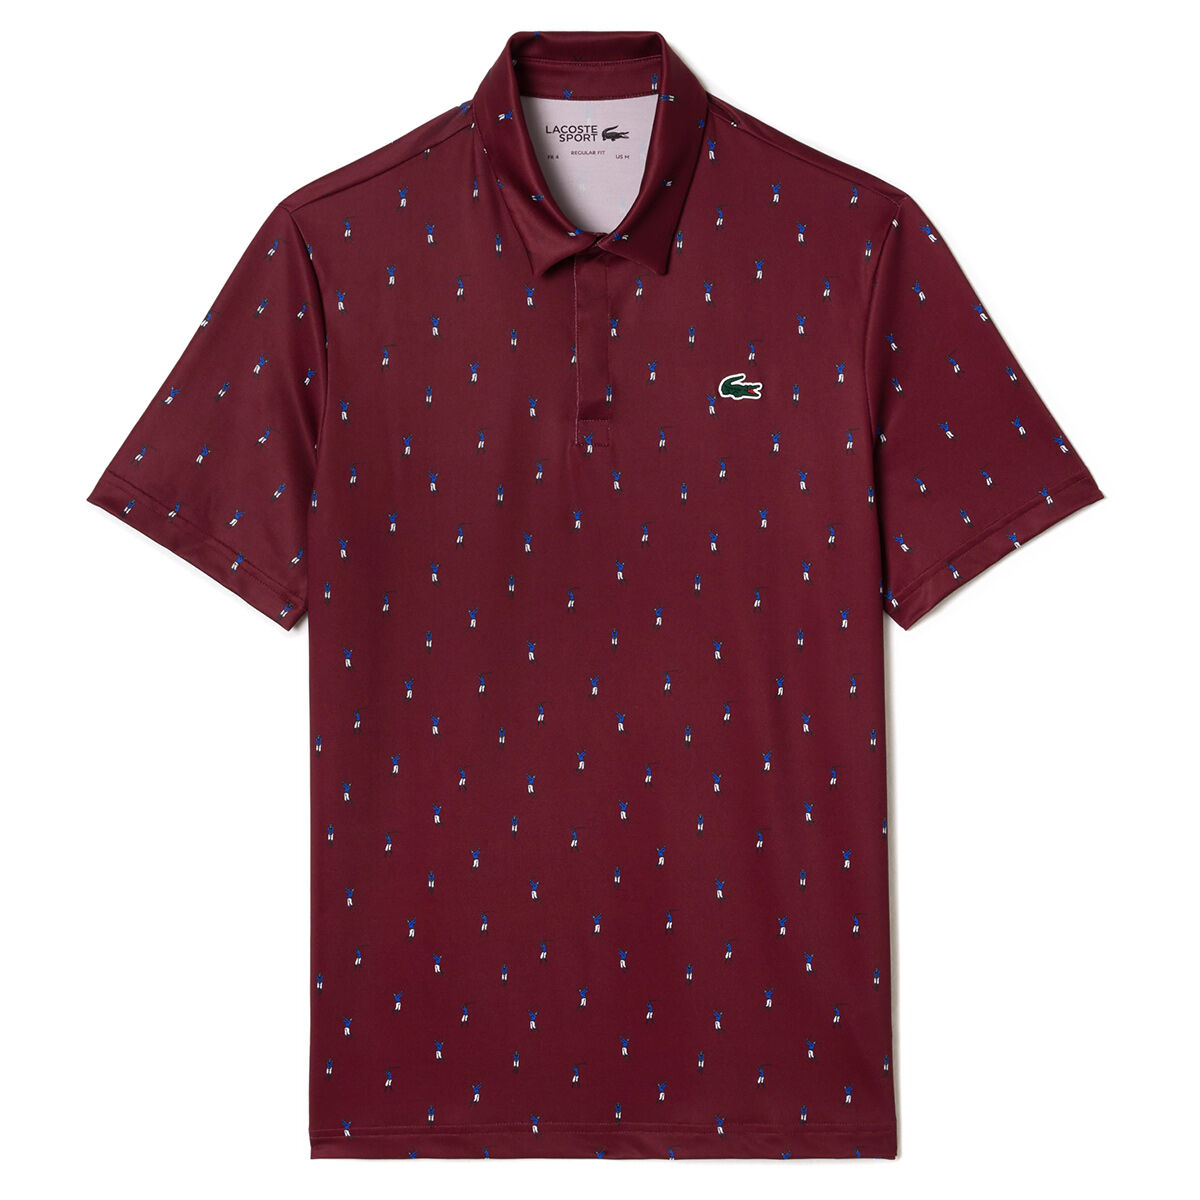 Lacoste Men’s All-Over Print Golf Polo Shirt, Mens, Zin/hilo, Large | American Golf